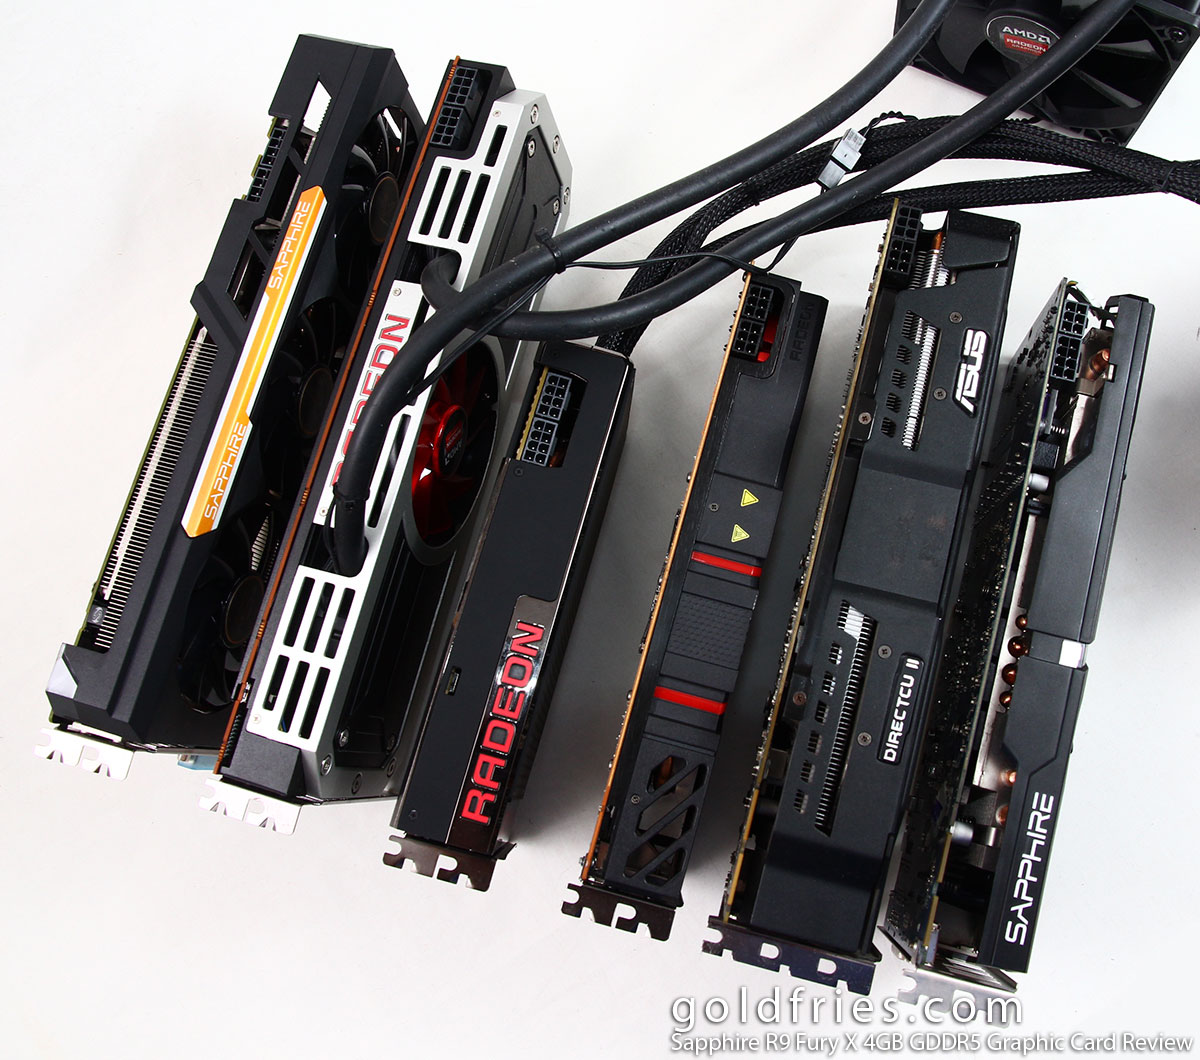 Sapphire R9 Fury X 4GB GDDR5 Graphic Card Review